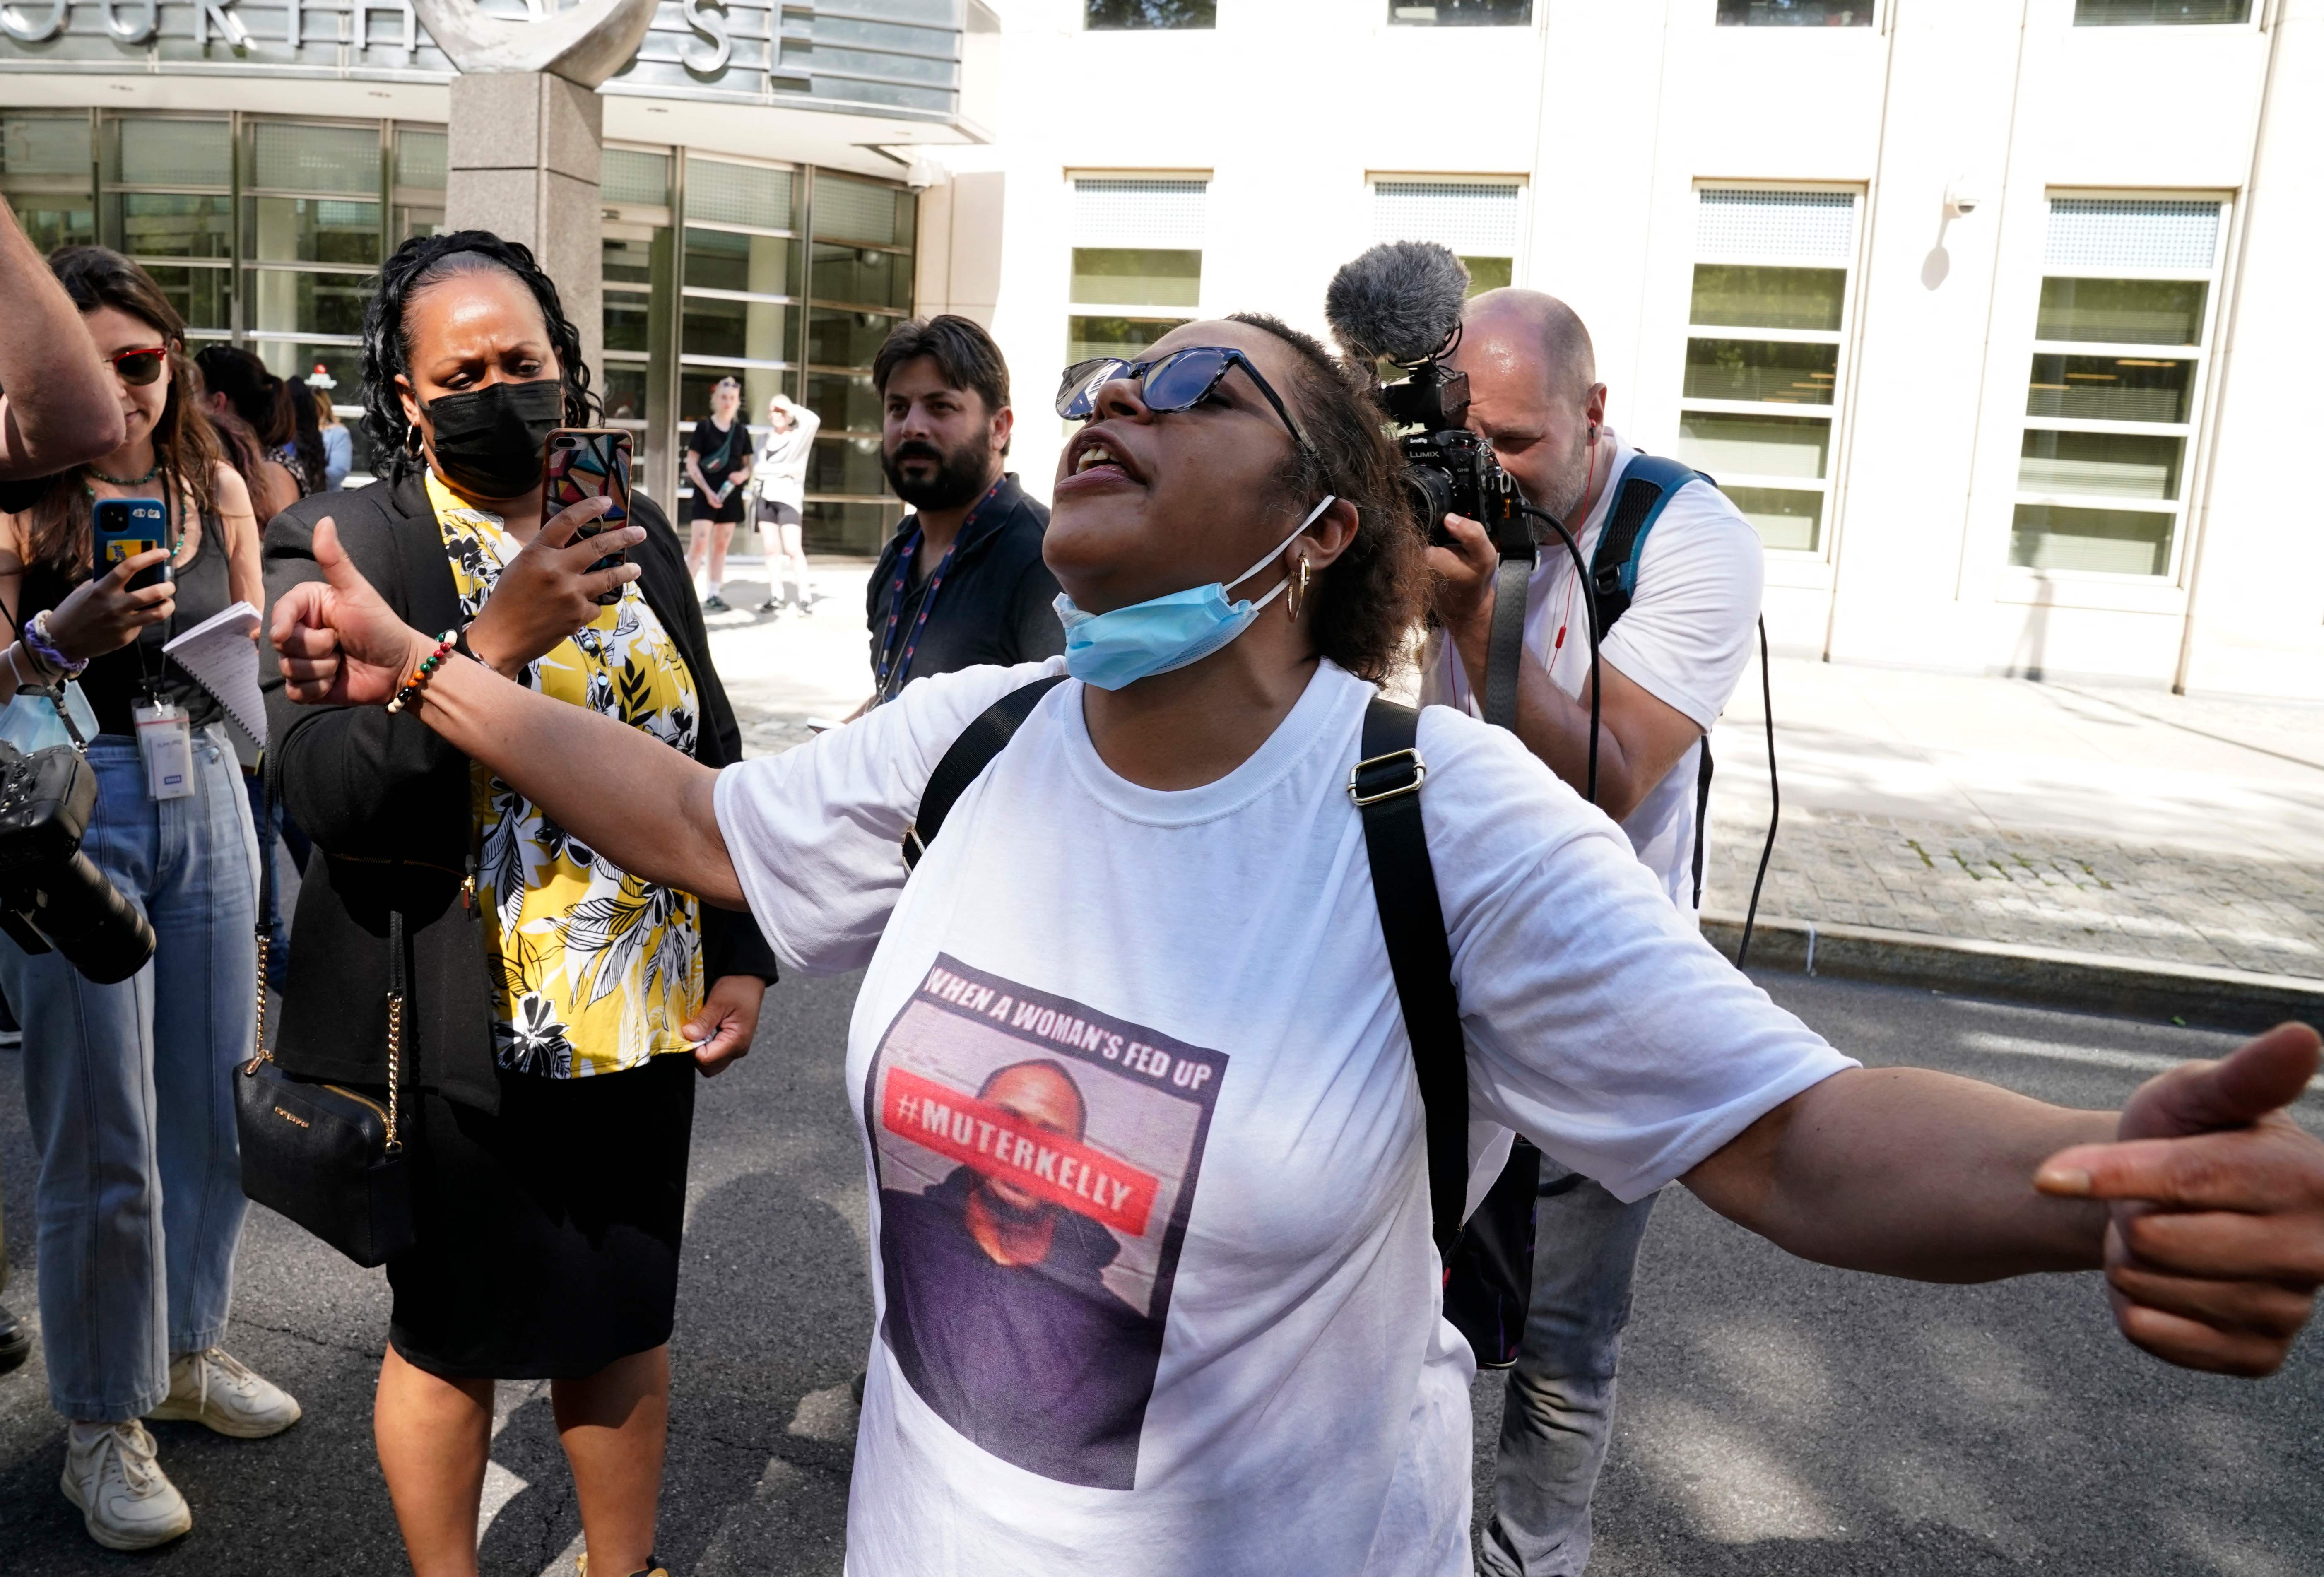 R&B singer R. Kelly's supporter reacts following the sentencing hearing at Brooklyn Federal Court in New York, on June 29, 2022.